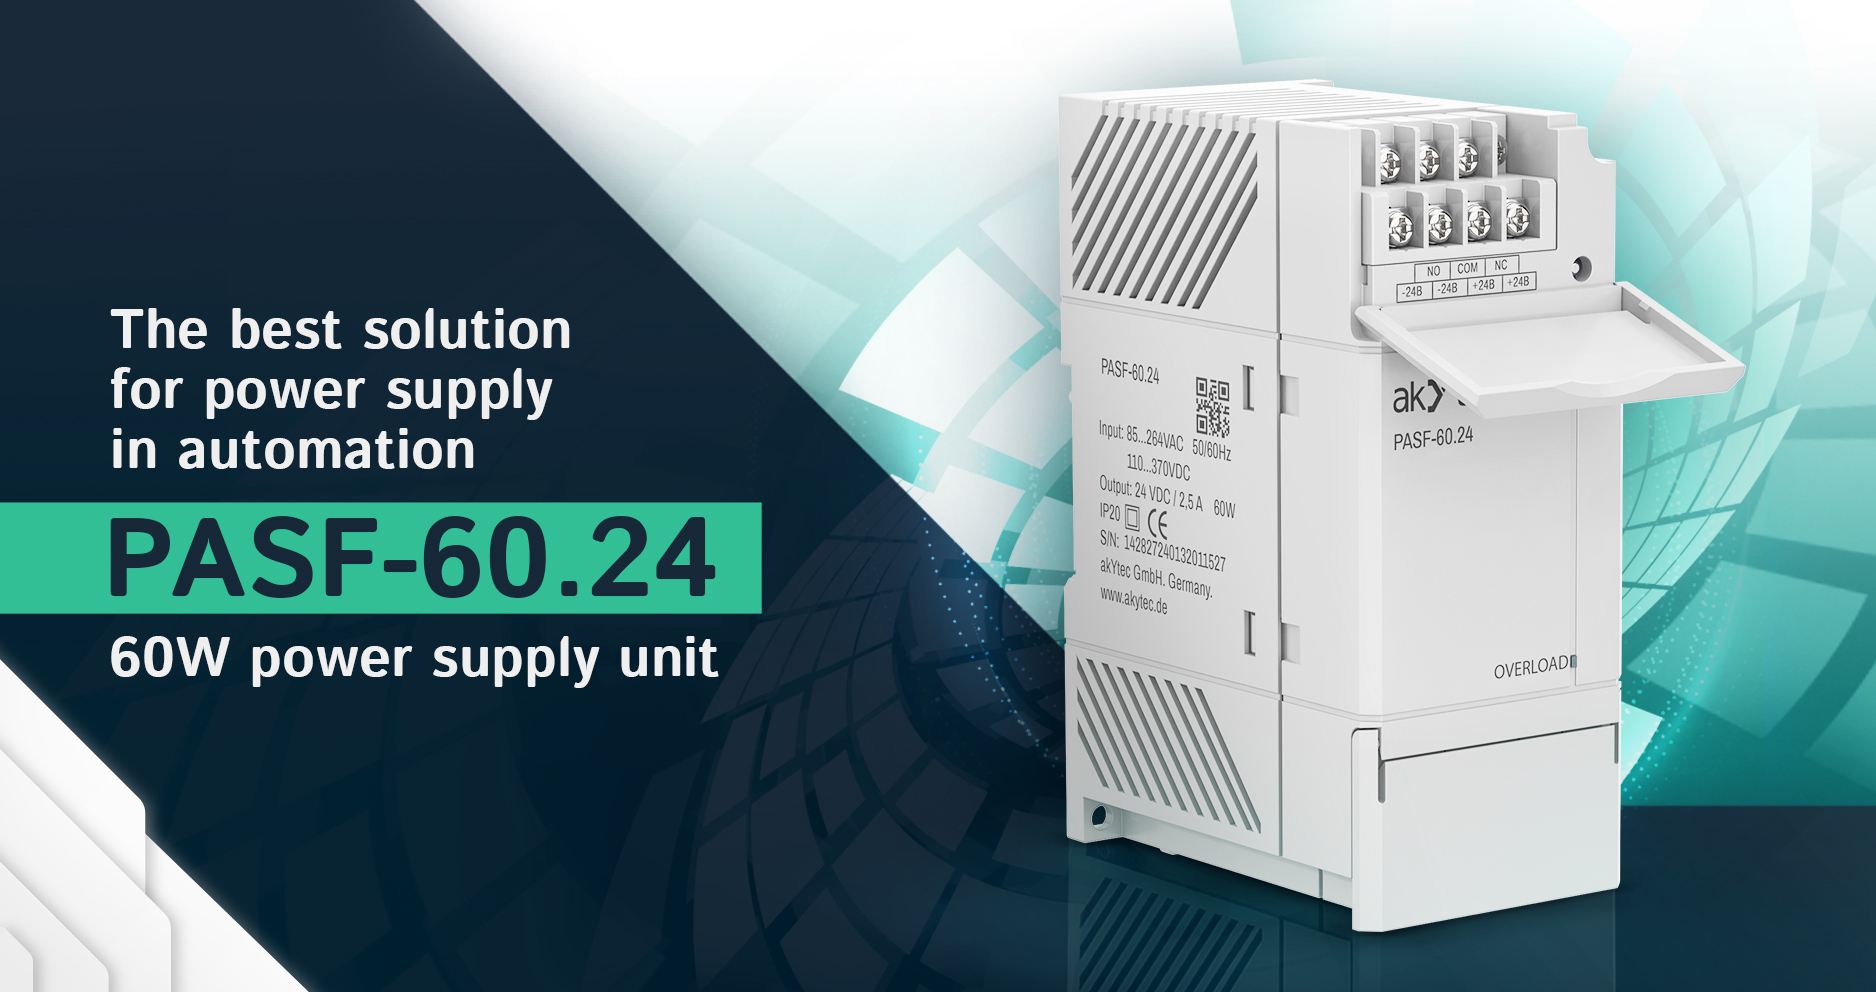 Introducing the PASF-60.24 Power Supply Unit from akYtec